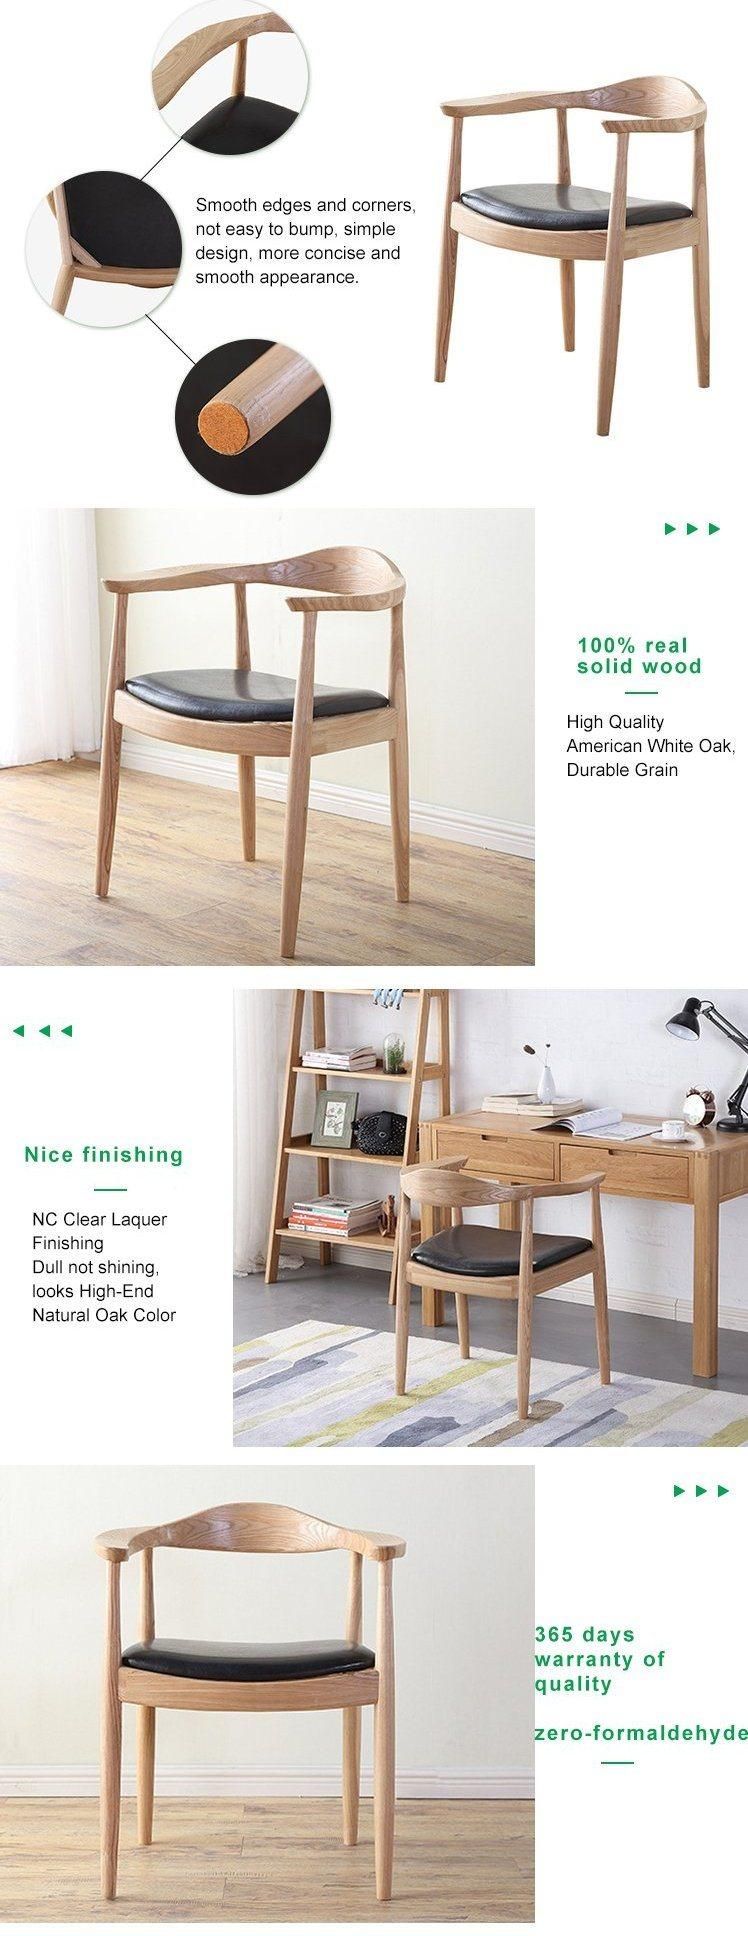 Furniture Modern Furniture Chair Home Furniture Wooden Furniture Wooden Chair Leather Solid Wood Low Round Back Cafe Furniture Dining Chair with Wooden Leg